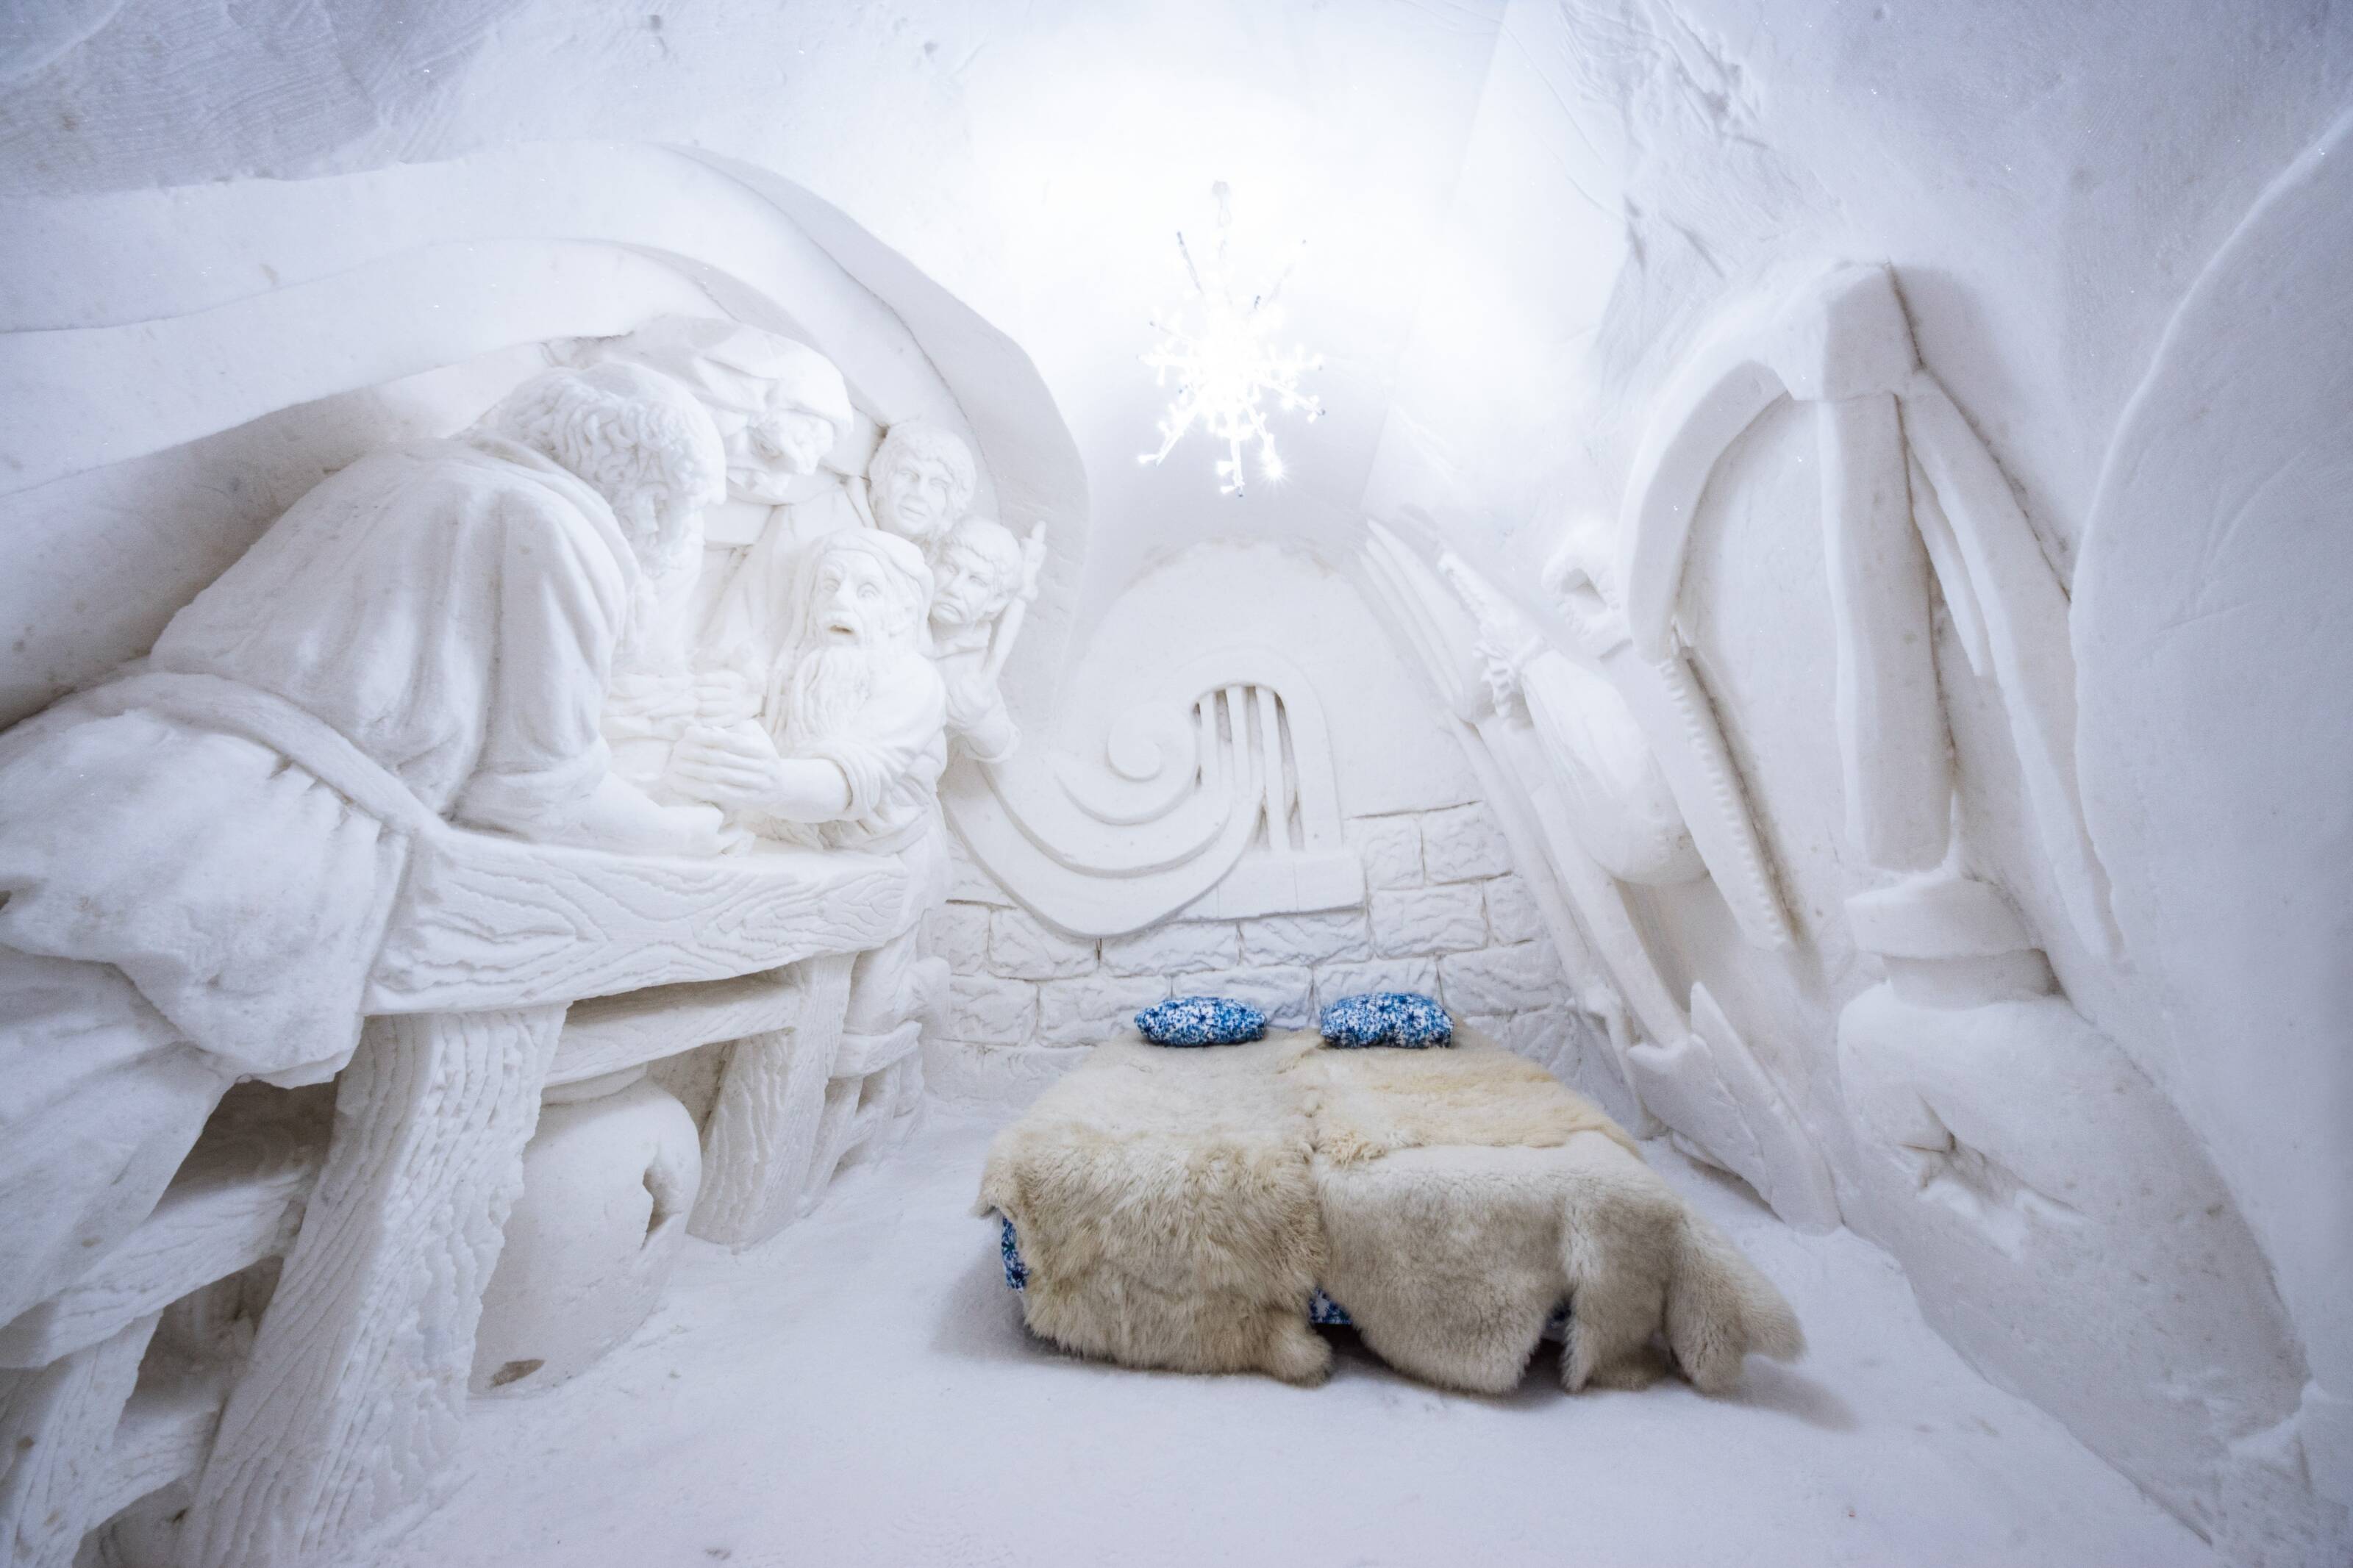 The interior of a snow hotel room with snow sculpture decorations.